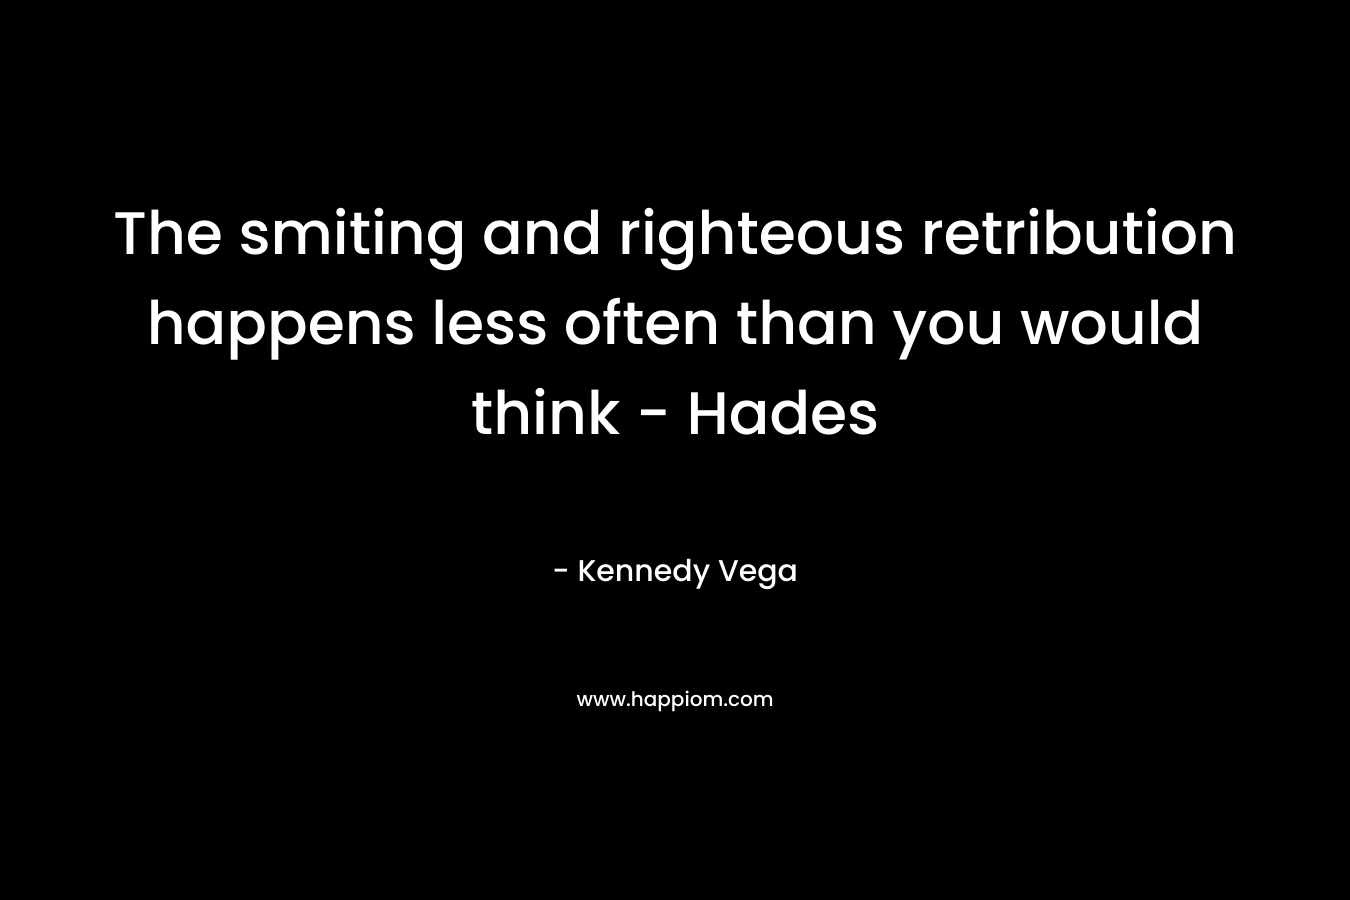 The smiting and righteous retribution happens less often than you would think - Hades